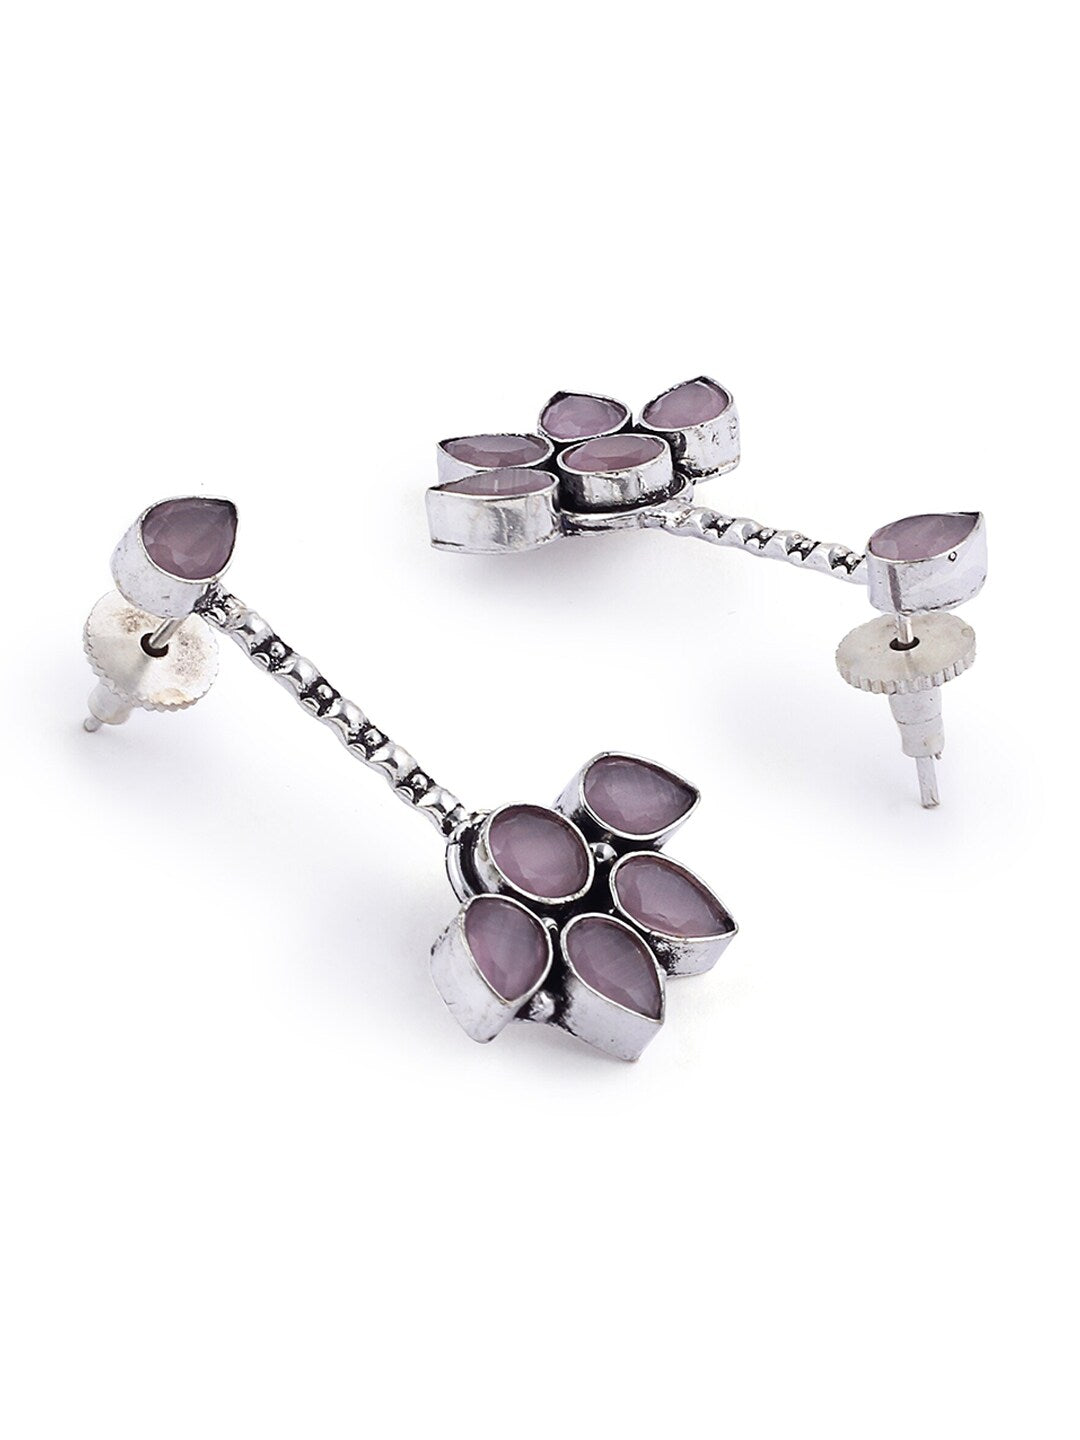 EL REGALO Handcrafted 925 Silver Plated Lavender Stones Studded Flower Drop Statement Earrings